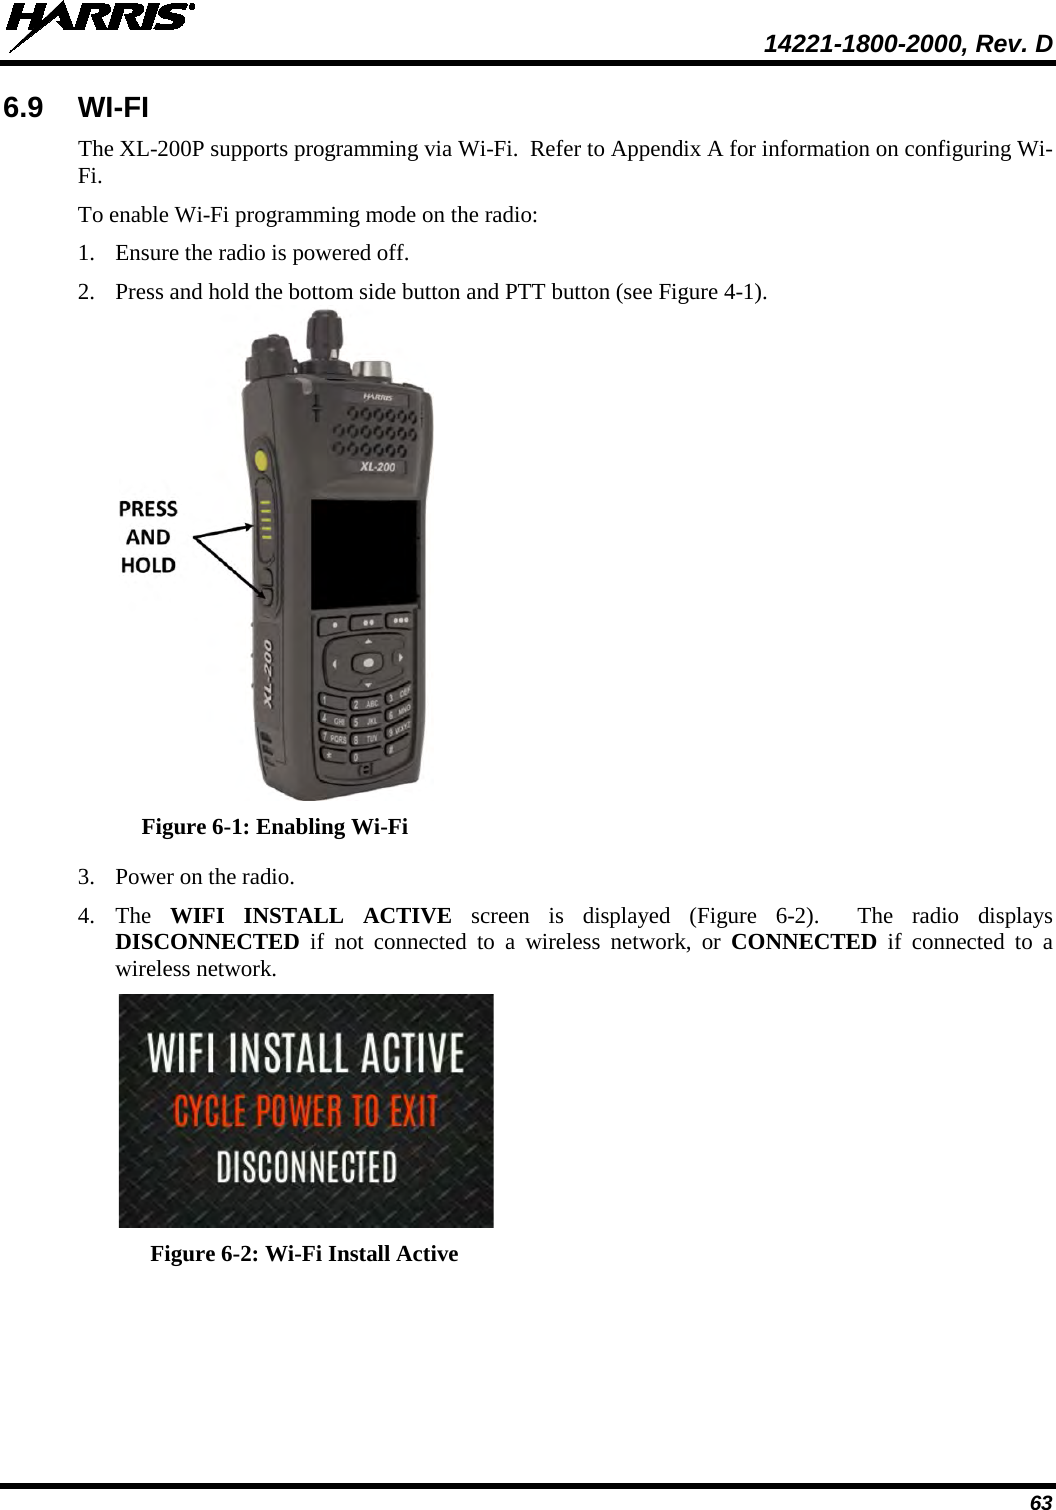  14221-1800-2000, Rev. D 63 6.9 WI-FI  The XL-200P supports programming via Wi-Fi.  Refer to Appendix A for information on configuring Wi-Fi. To enable Wi-Fi programming mode on the radio: 1. Ensure the radio is powered off. 2. Press and hold the bottom side button and PTT button (see Figure 4-1).  Figure 6-1: Enabling Wi-Fi 3. Power on the radio. 4. The  WIFI INSTALL ACTIVE screen is displayed (Figure  6-2).  The radio displays DISCONNECTED if not connected to a wireless network, or CONNECTED if connected to a wireless network.  Figure 6-2: Wi-Fi Install Active 